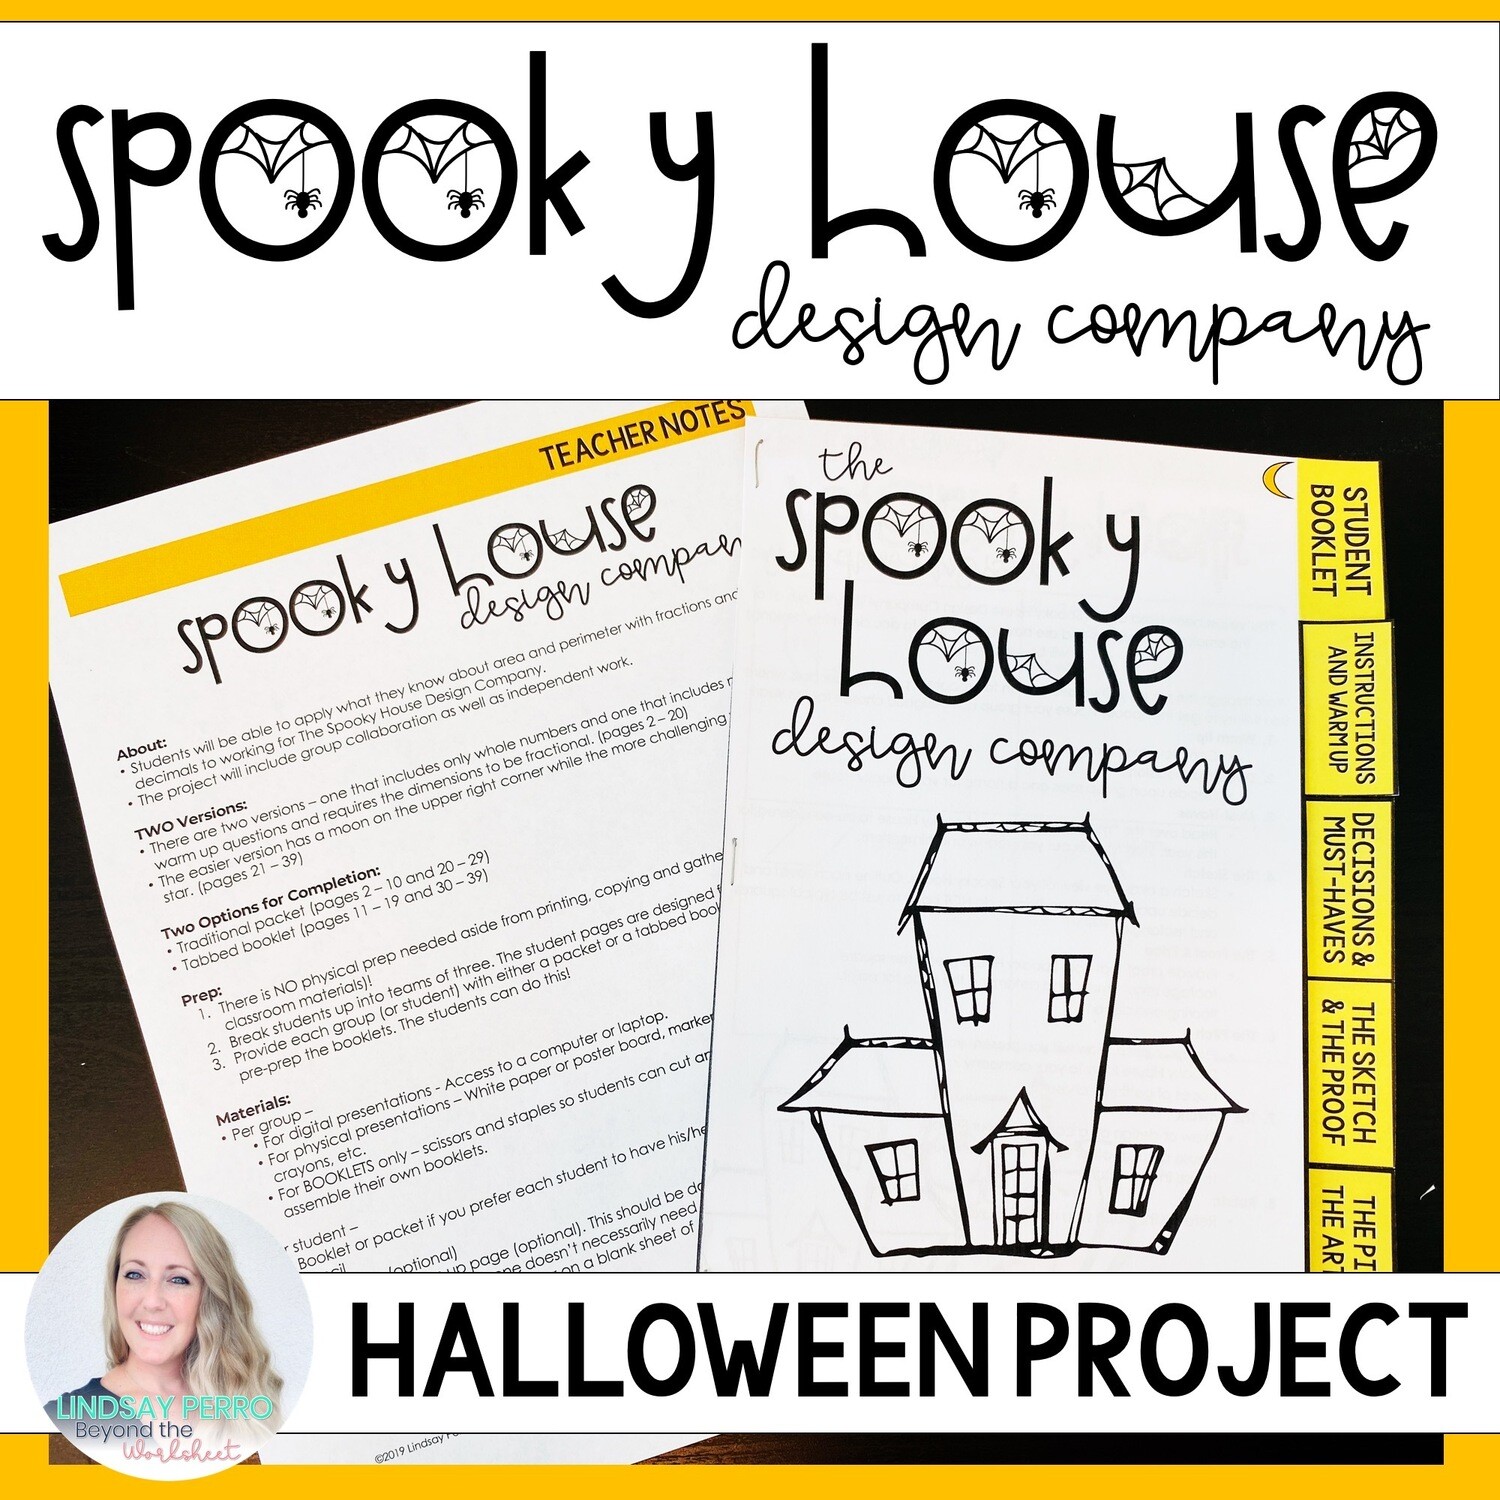 Halloween Math Project - The Spooky House